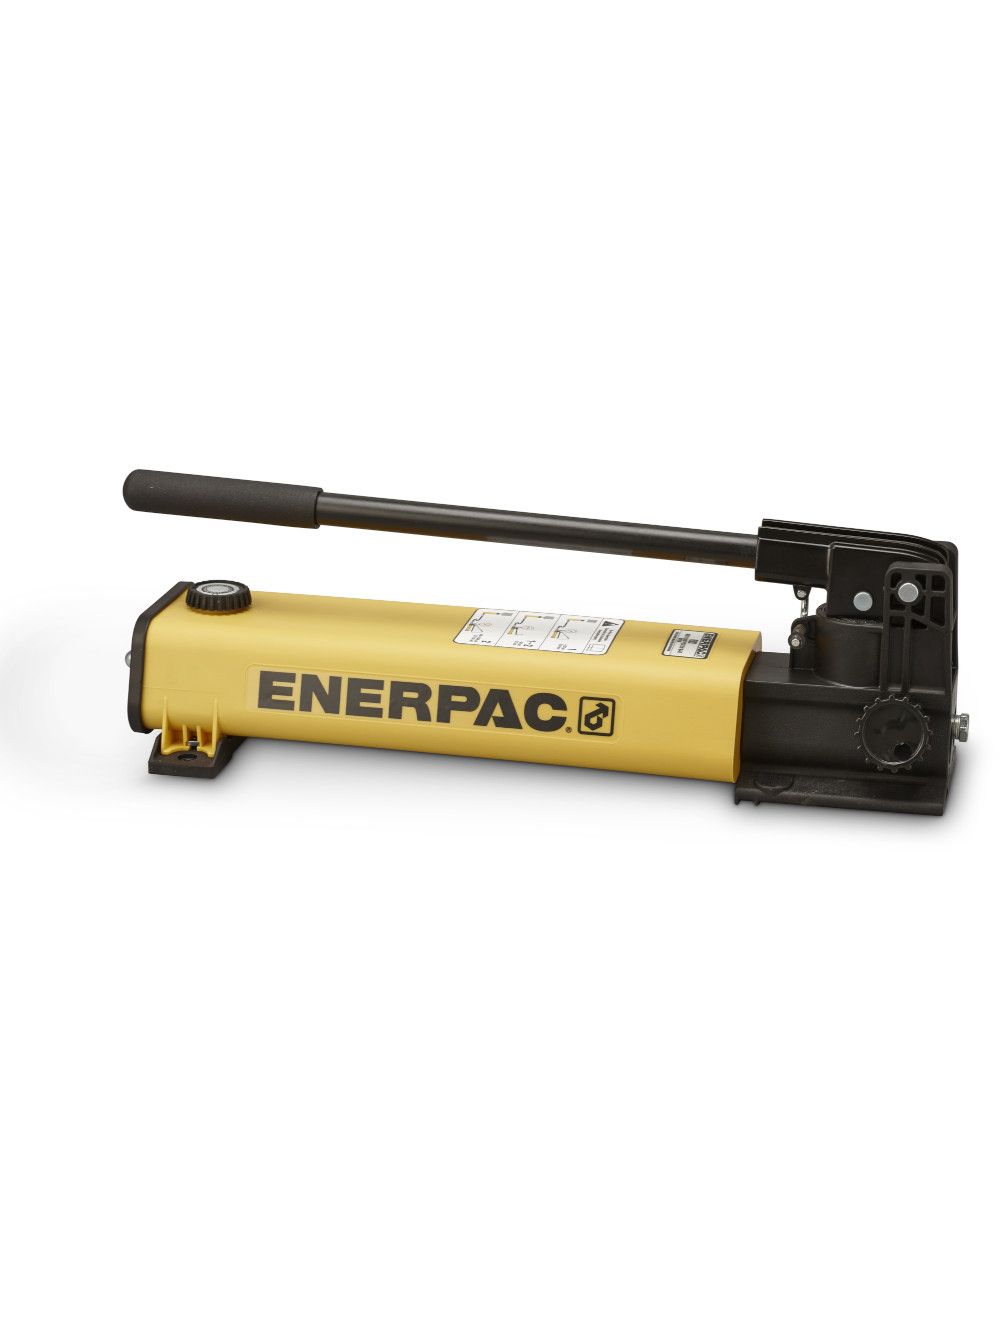 P802, Two Speed, Lightweight Hydraulic Hand Pump, 155 in3 Usable Oil  Enerpac